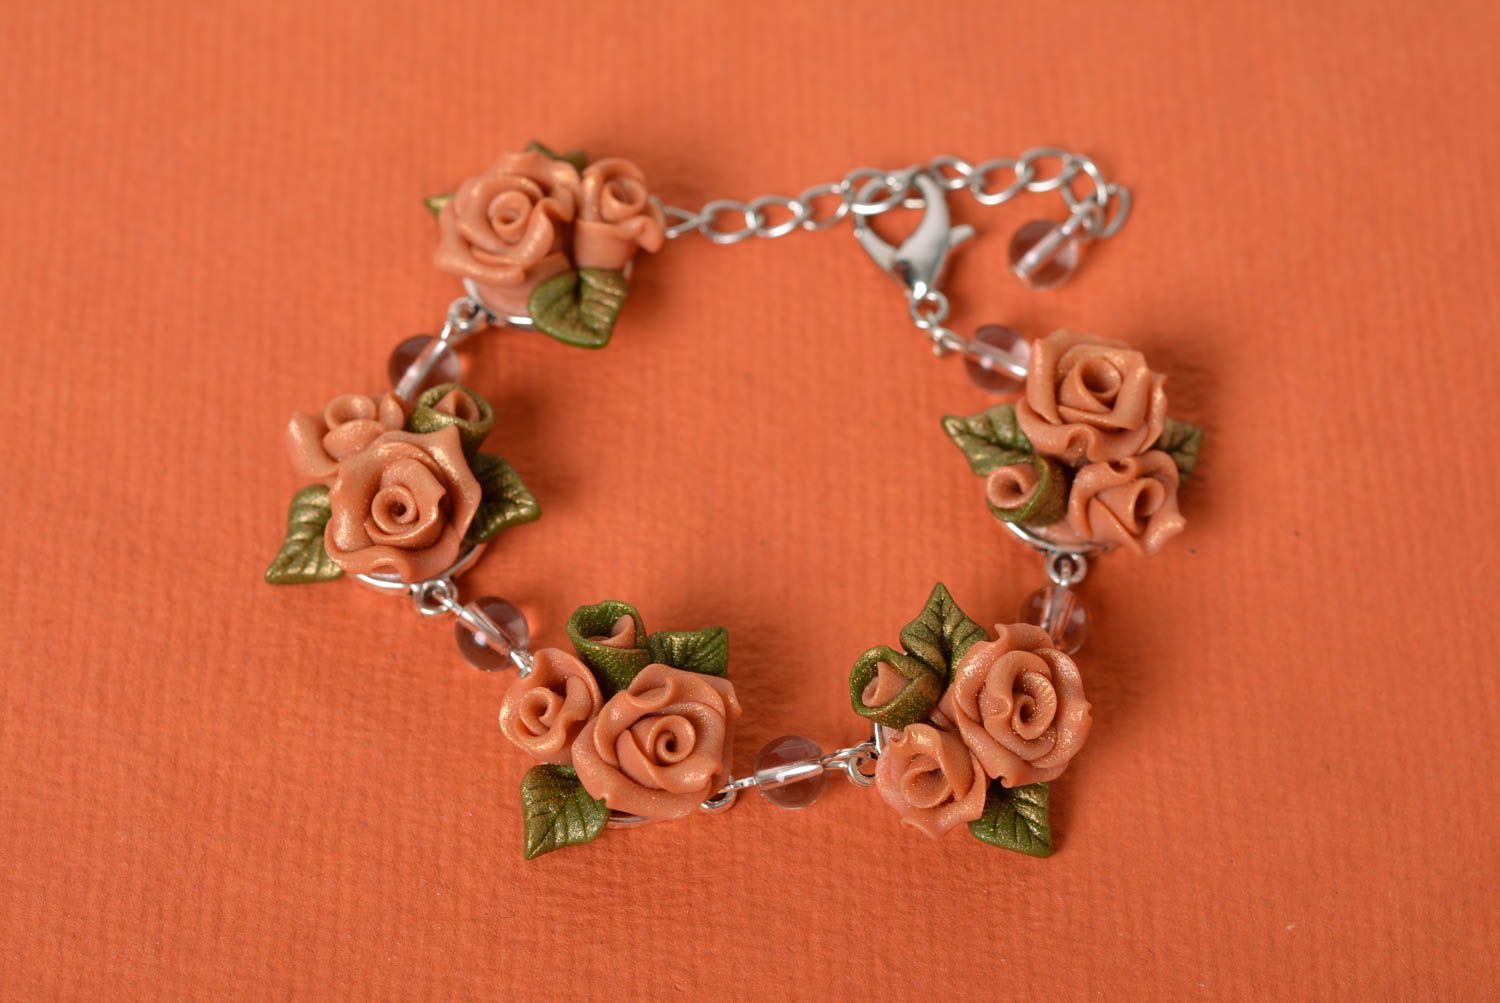 Chain handmade charm flower bracelet with red roses photo 1